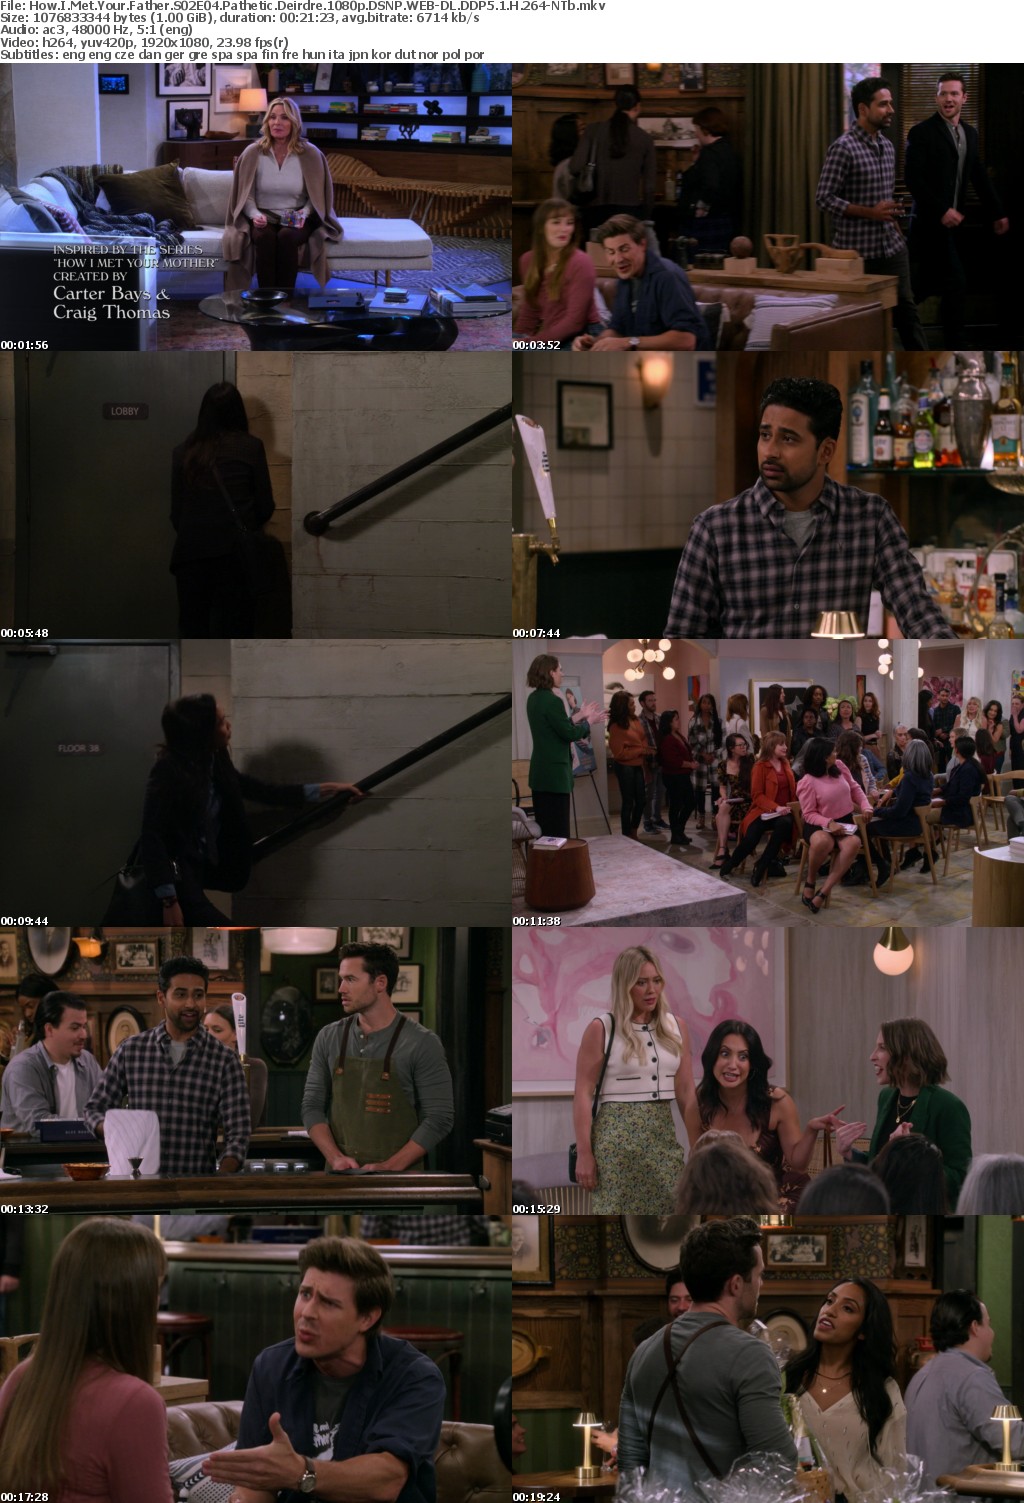 How I Met Your Father S02E04 Pathetic Deirdre 1080p DSNP WEBRip DDP5 1 x264-NTb